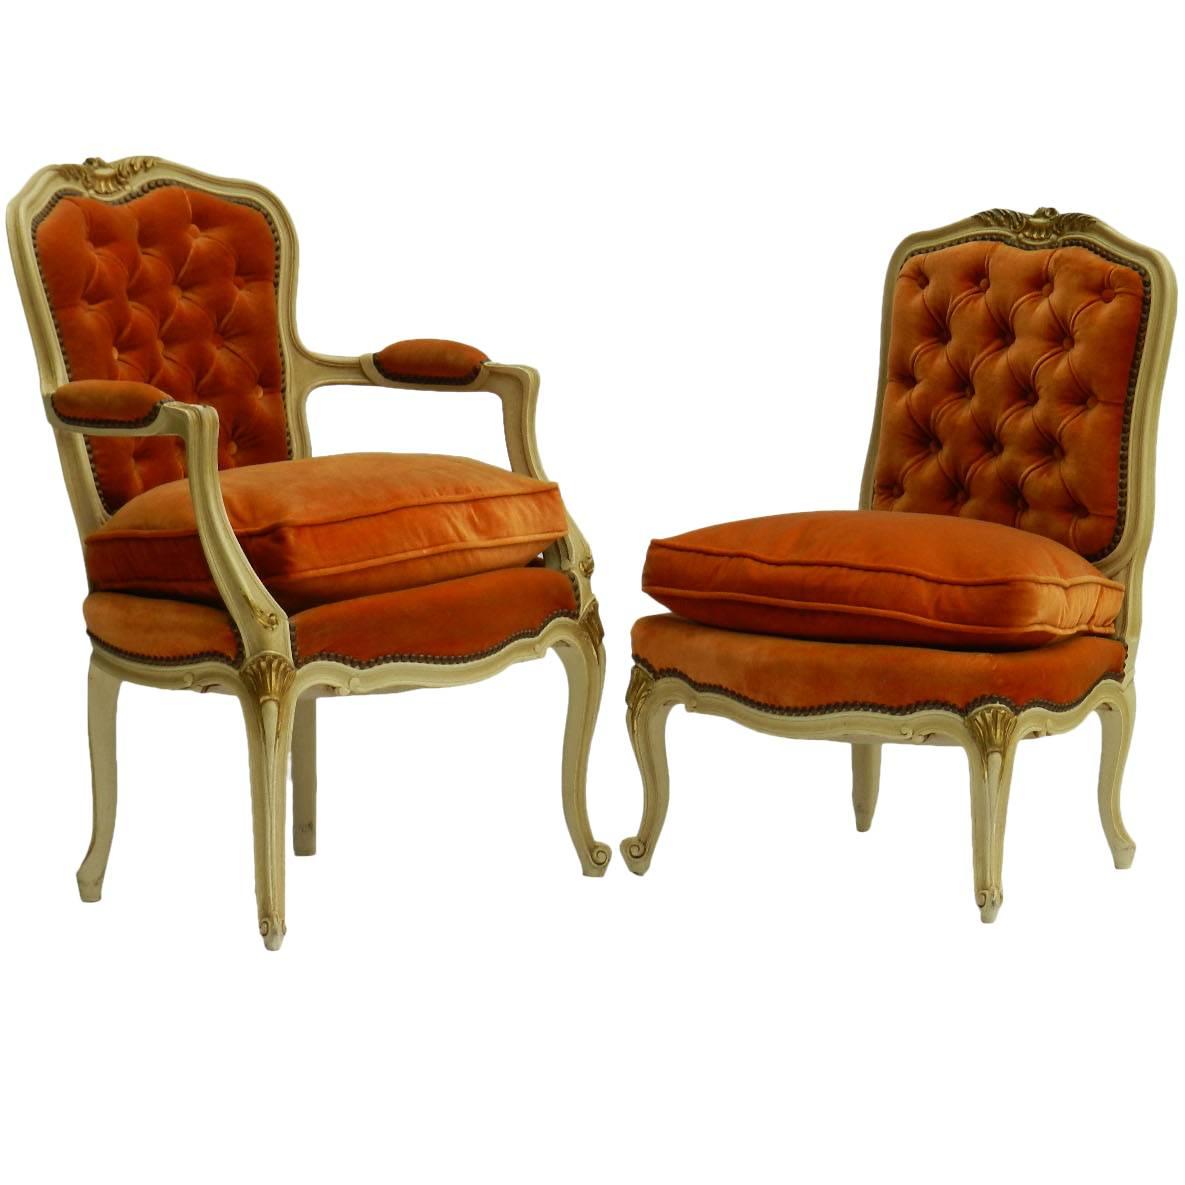 Two French Chairs Armchair & Boudoir Louis XV revival Tufted Button Back 